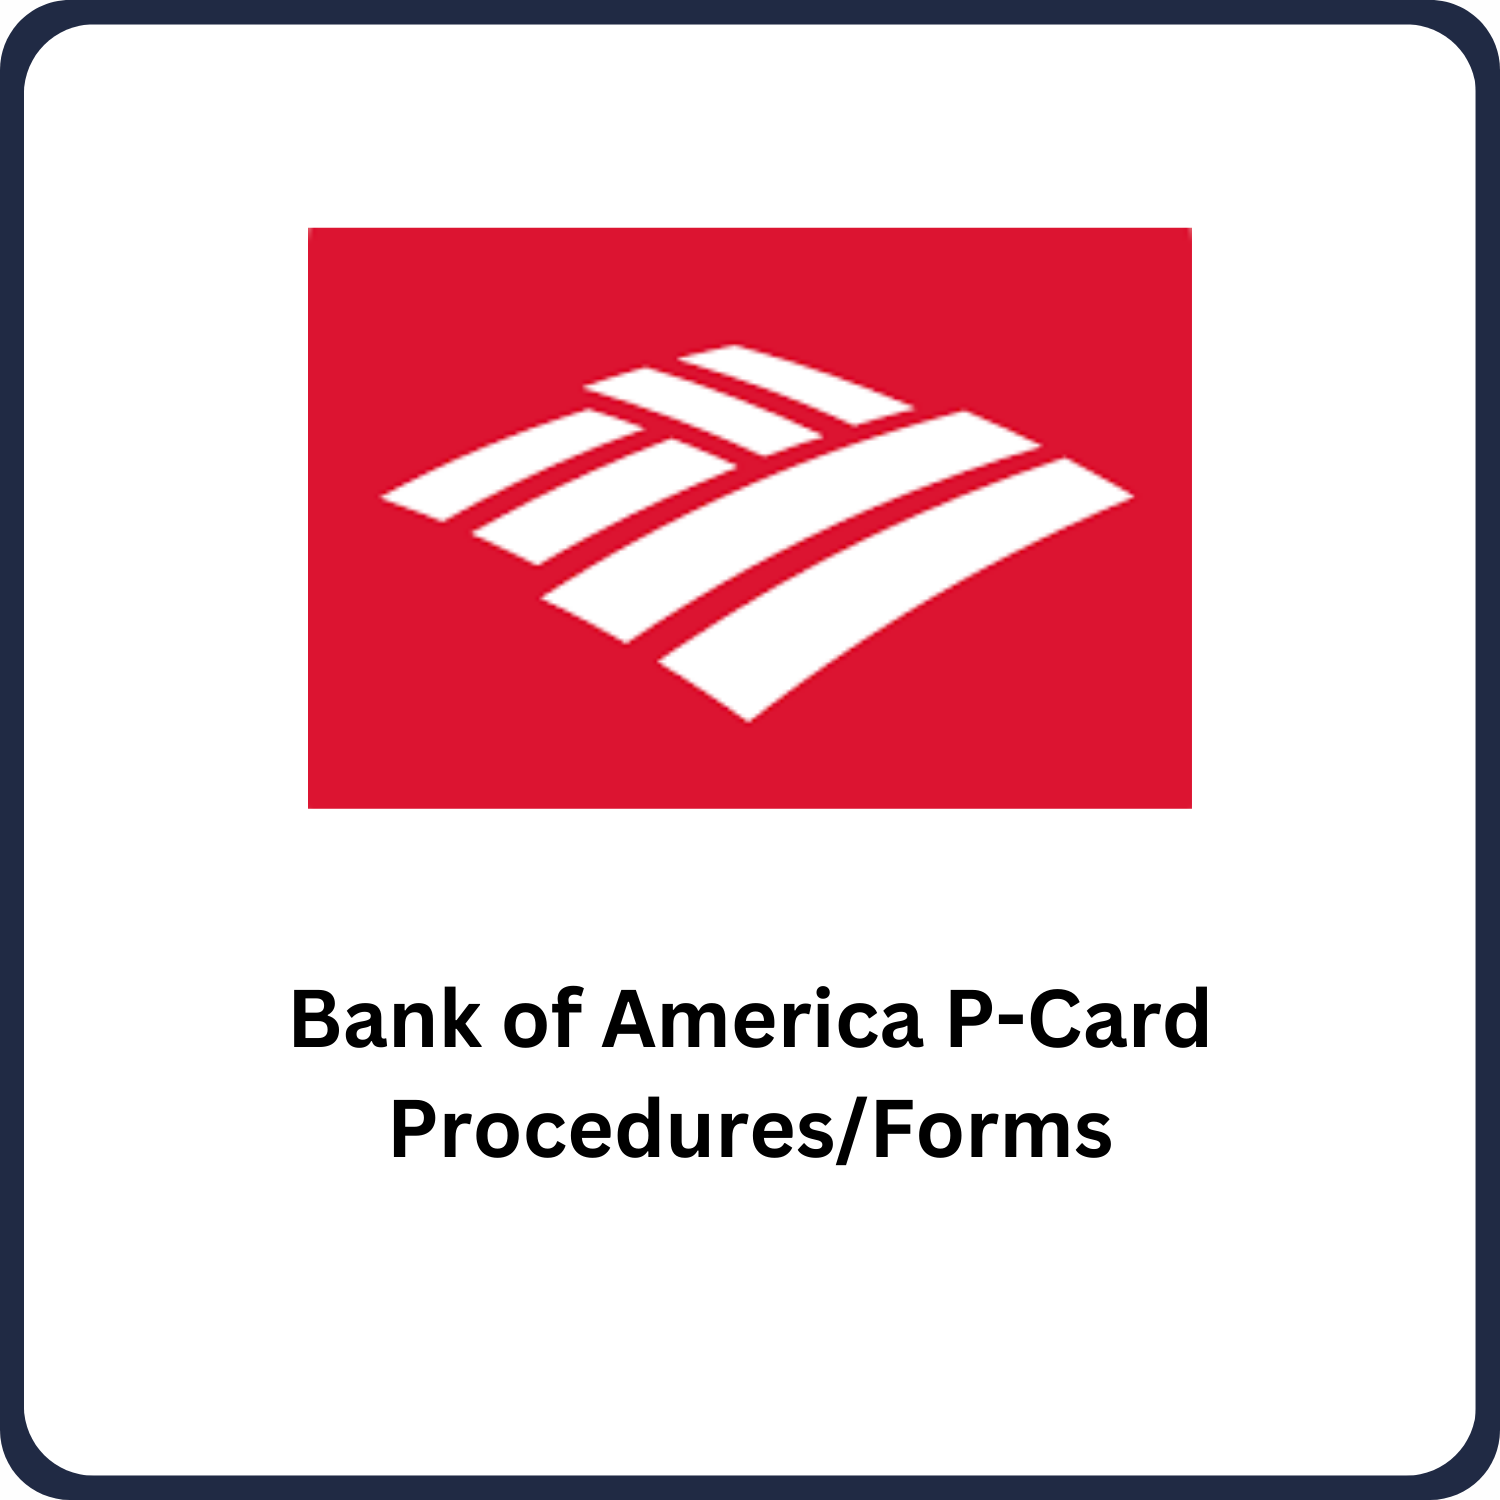 Bank of America P-Card Procedures/Forms